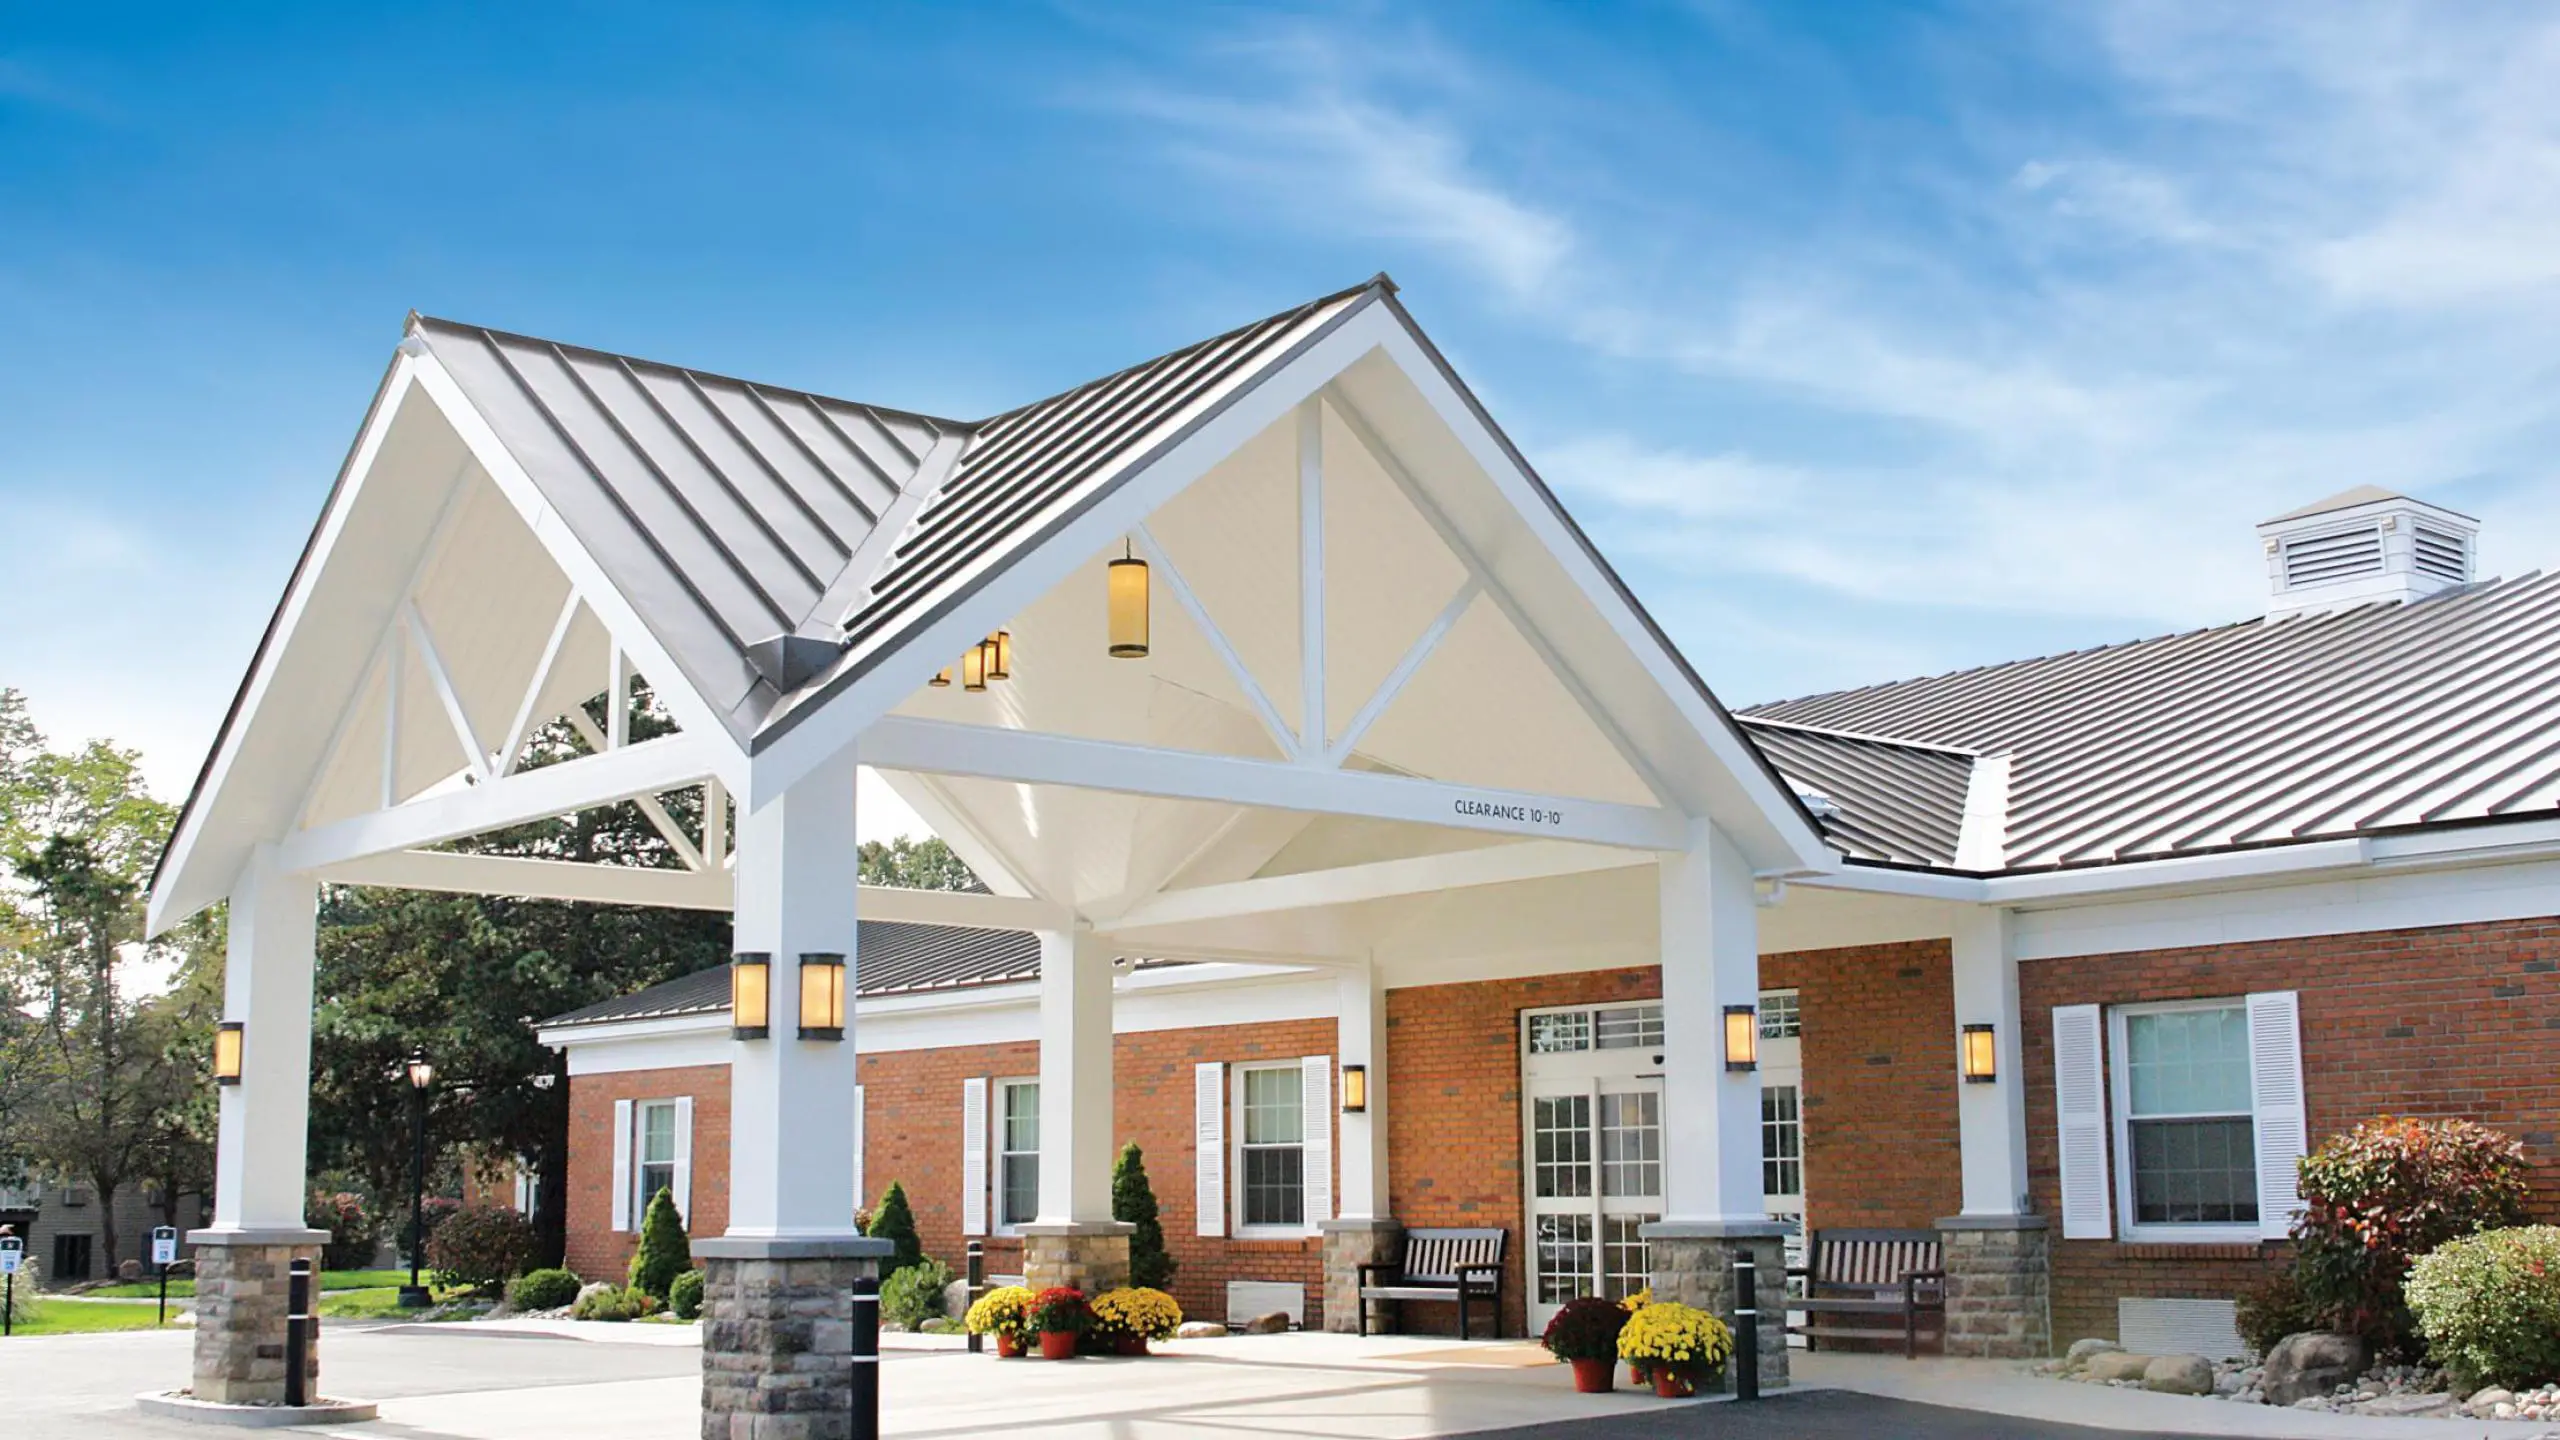 Photo of Kingsway Community, Assisted Living, Nursing Home, Independent Living, CCRC, Schenectady, NY 2